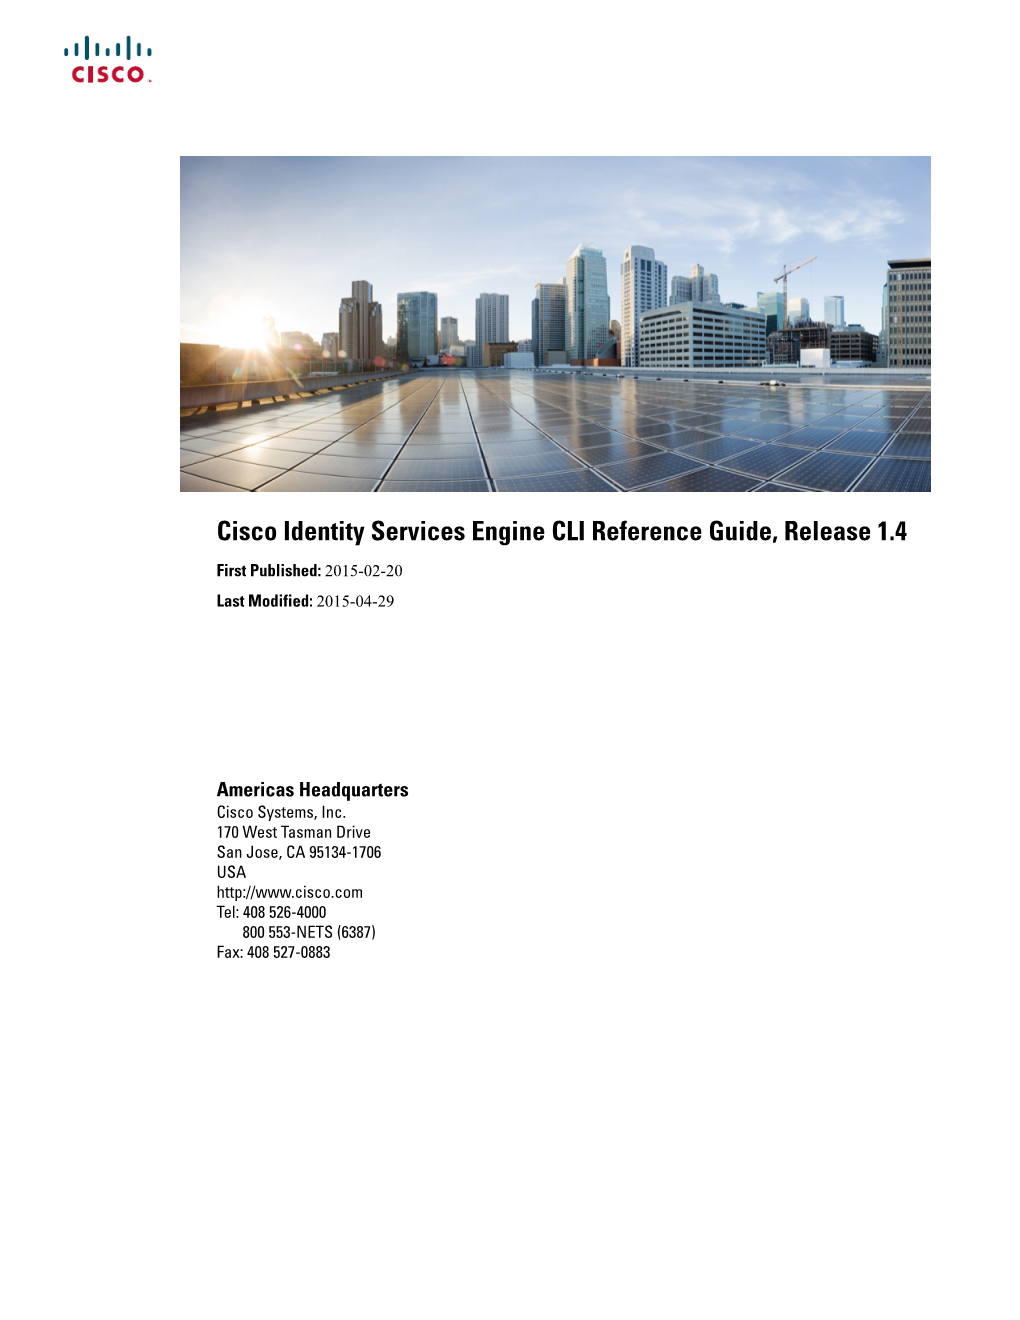 Cisco Identity Services Engine CLI Reference Guide, Release 1.4